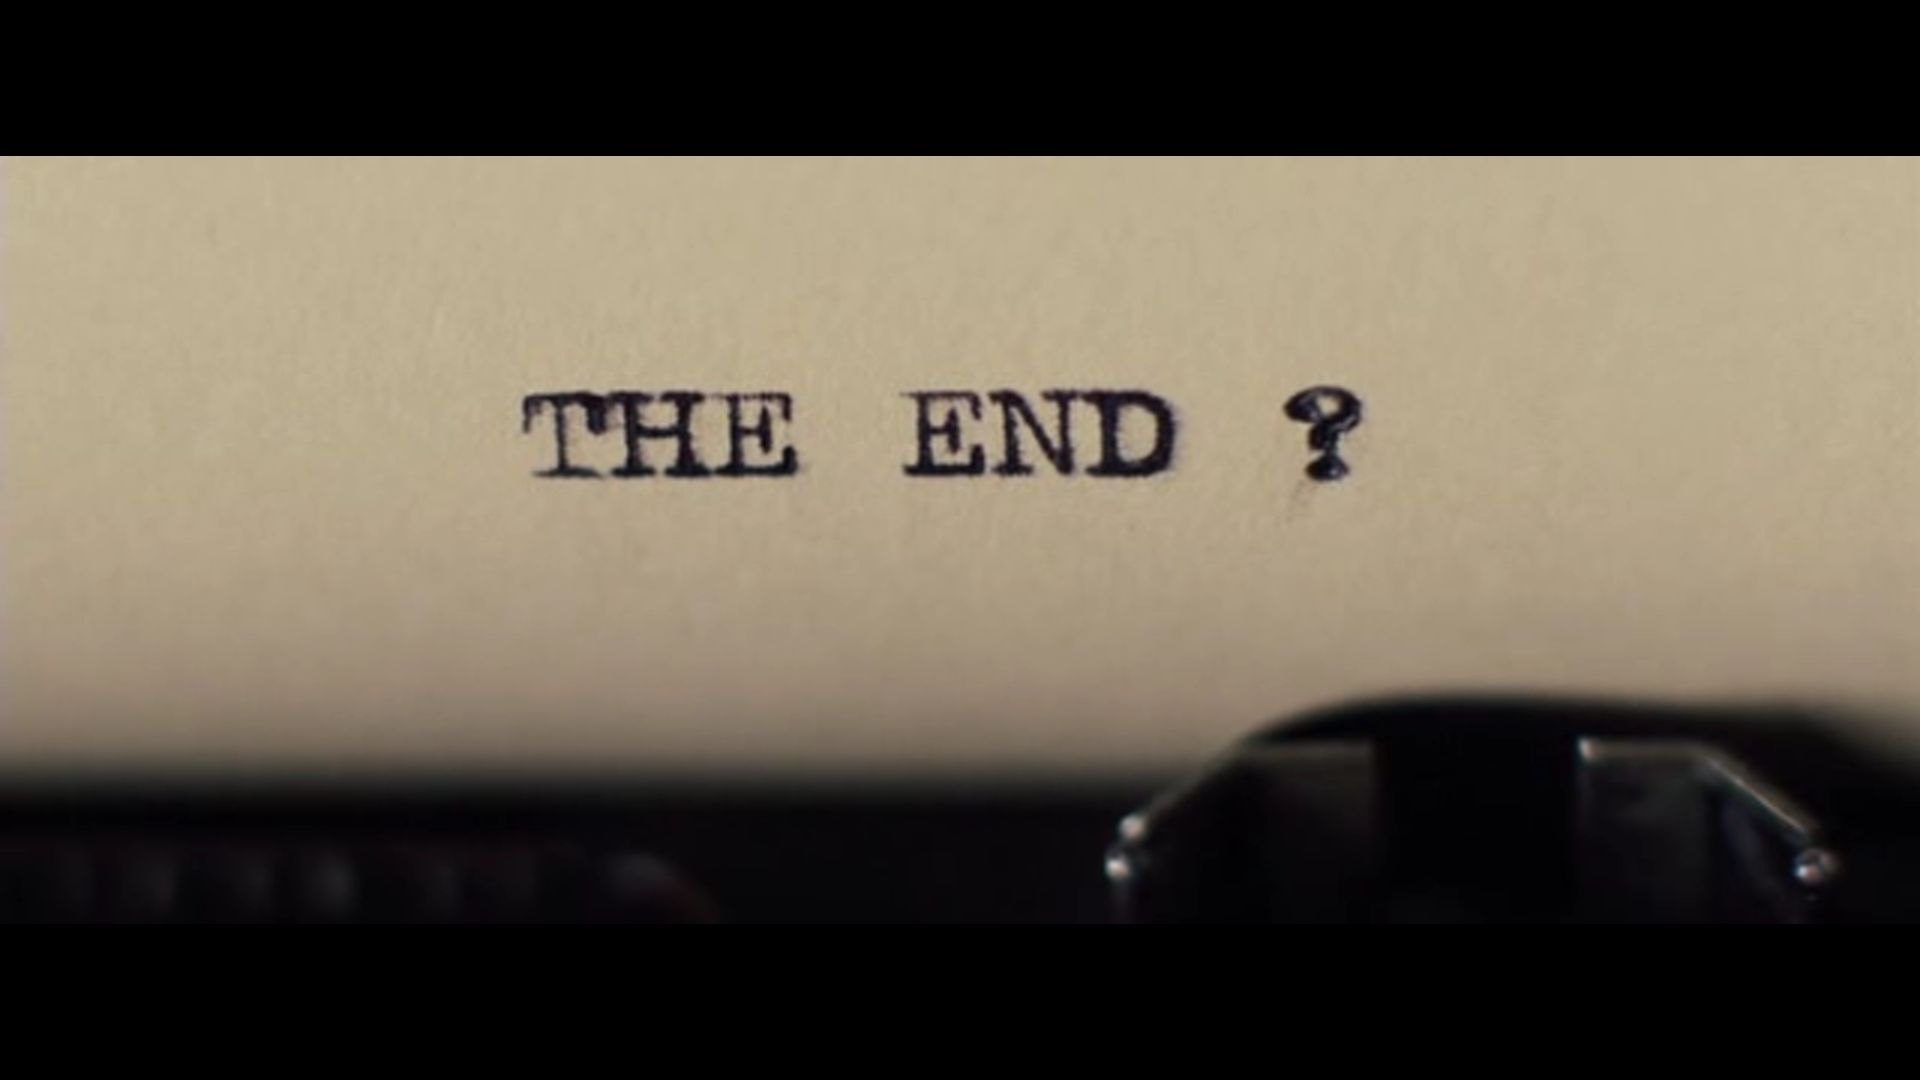 Reached the end. Конец the end. Табличка the end. The end надпись.